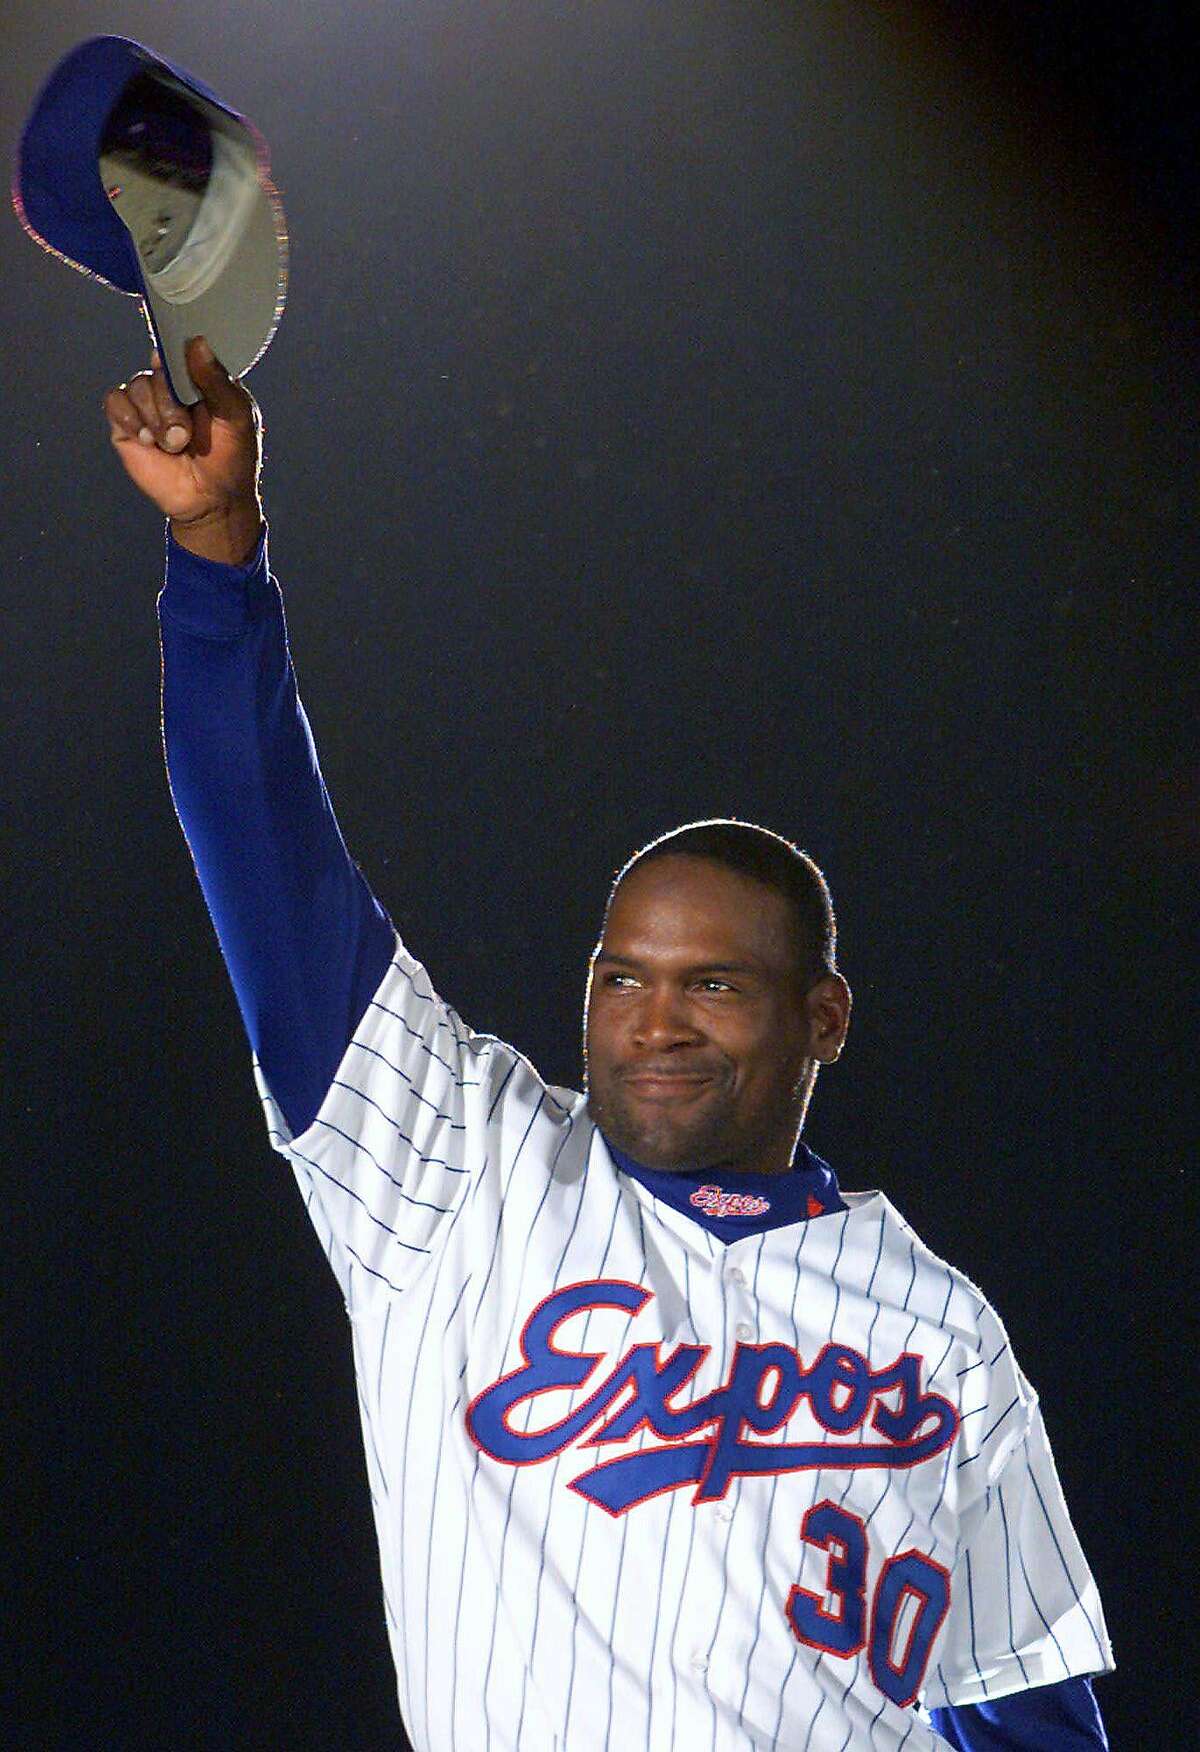 Tim Raines #30 of the Montreal Expos